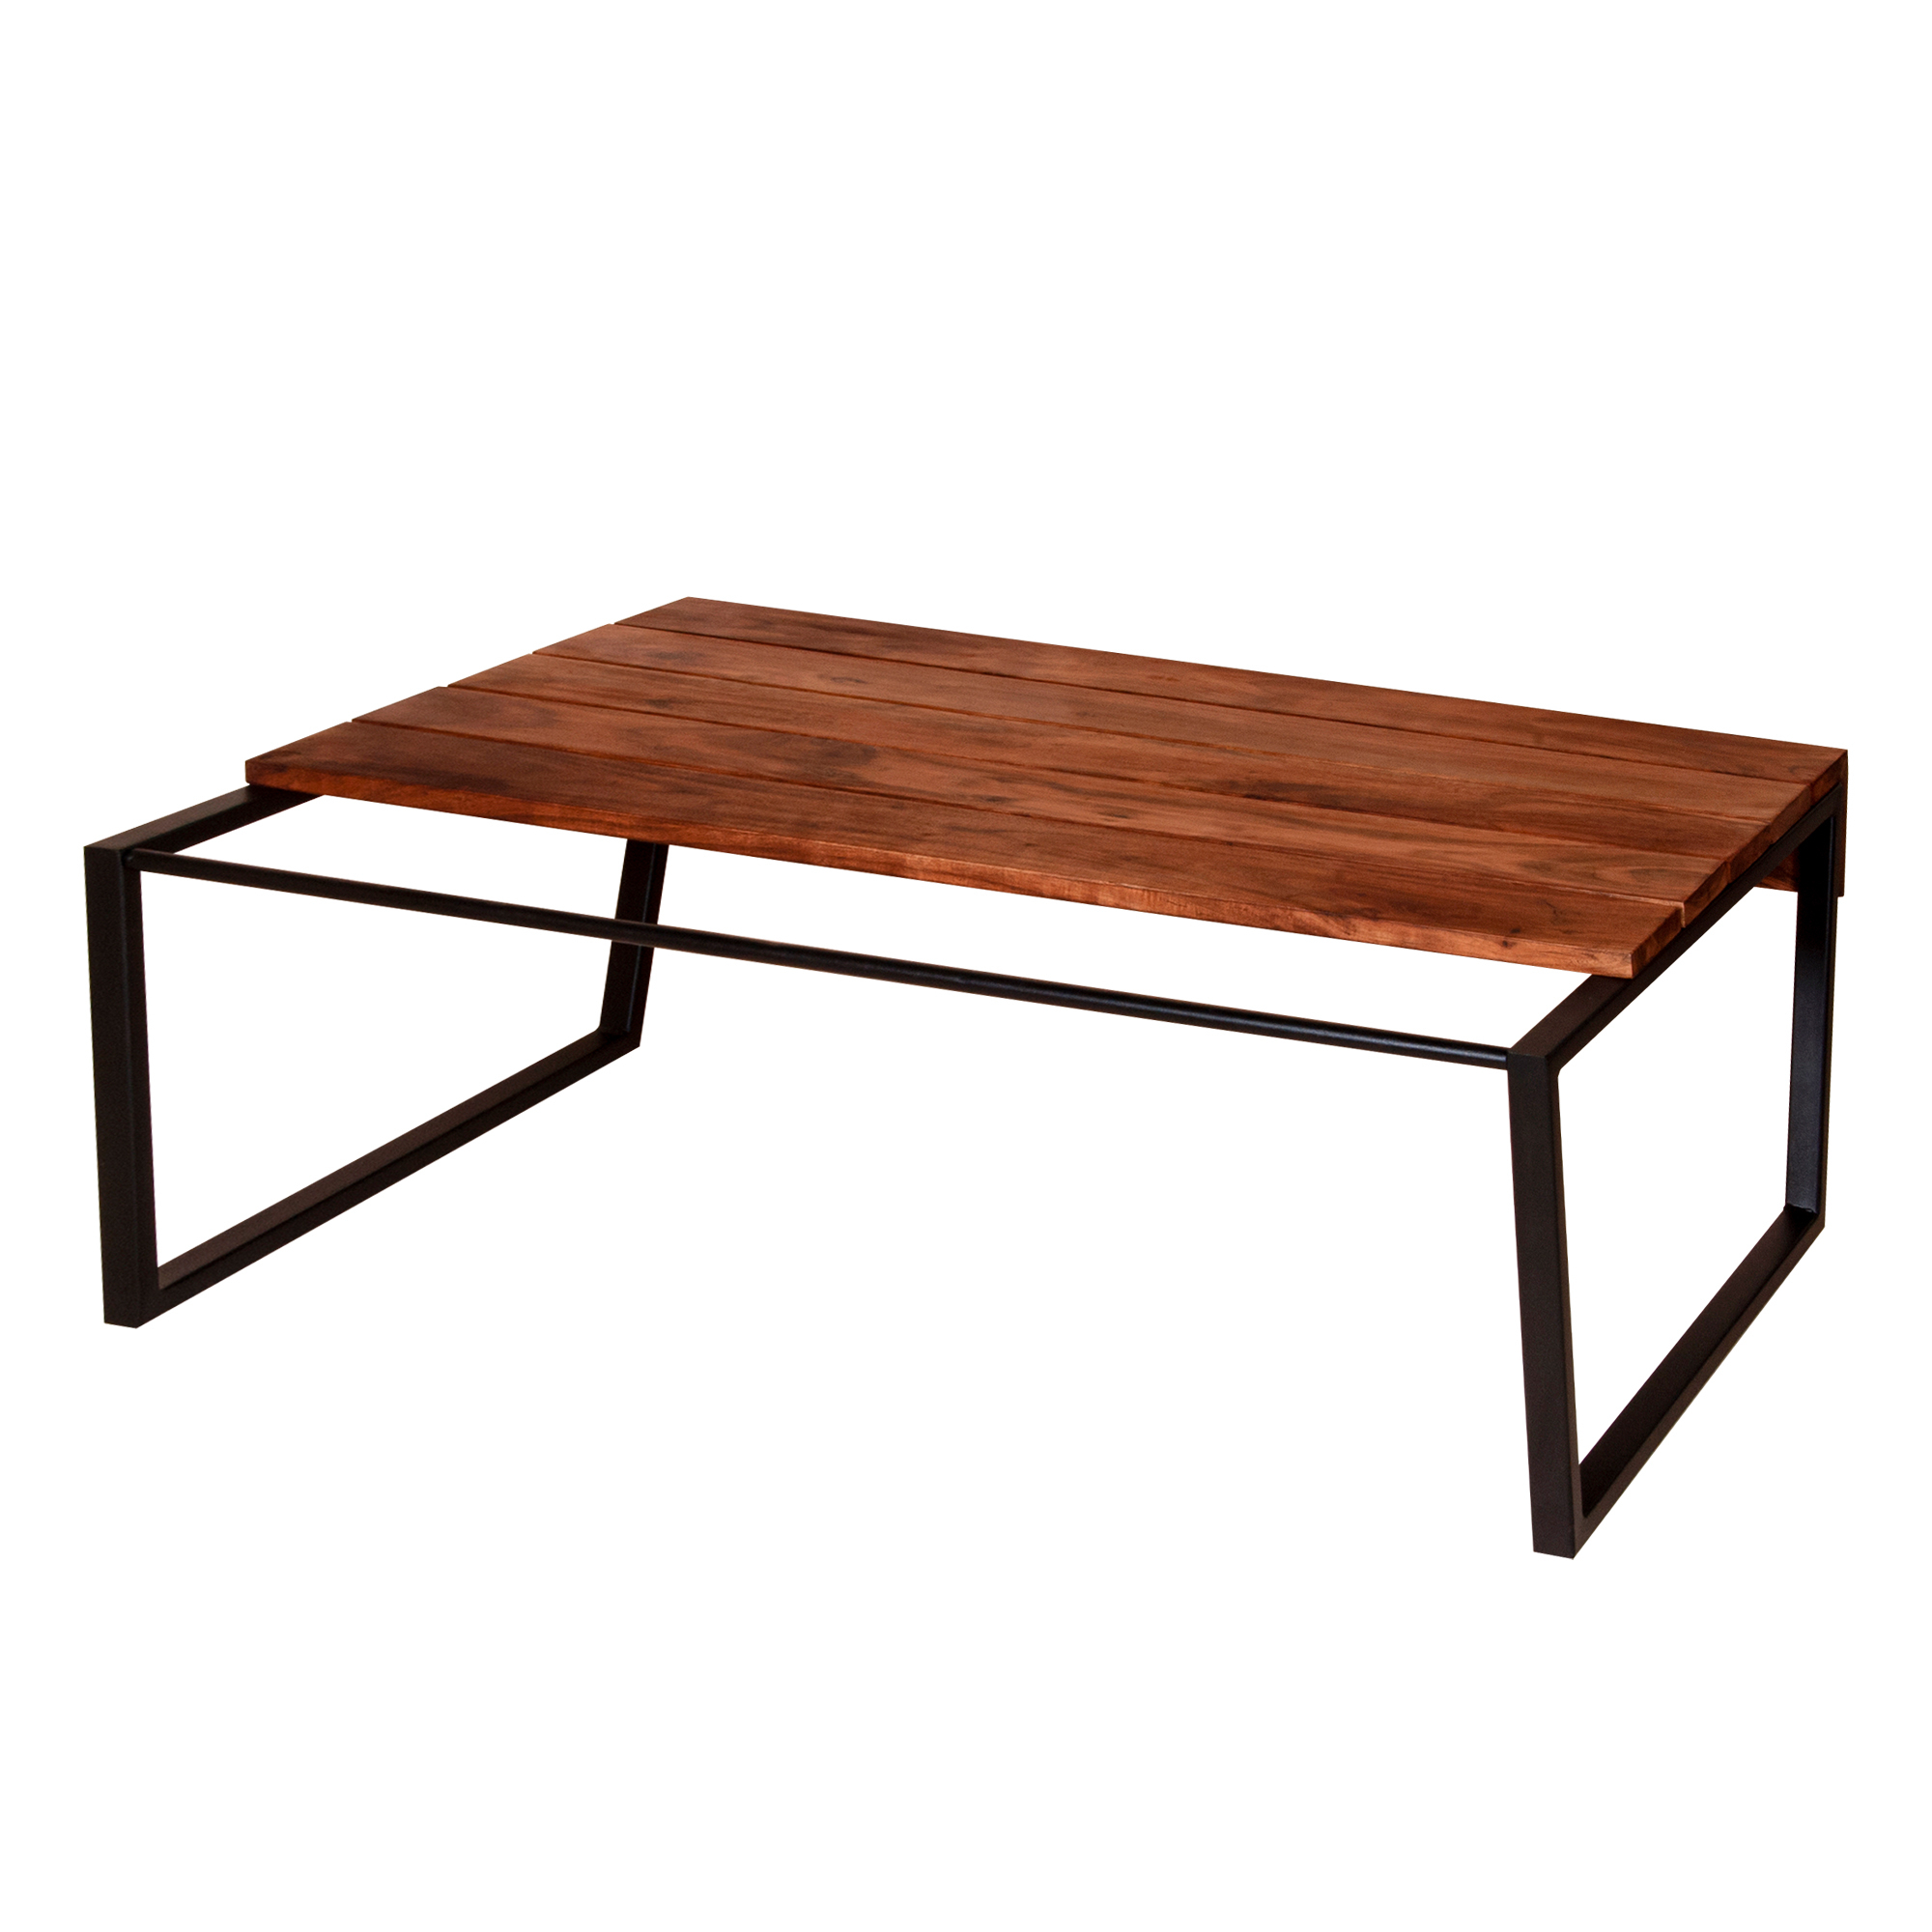 41.7 Inch Rectangular Coffee Table With Plank Style Top, Metal Frame, Brown And Black- Saltoro Sherpi